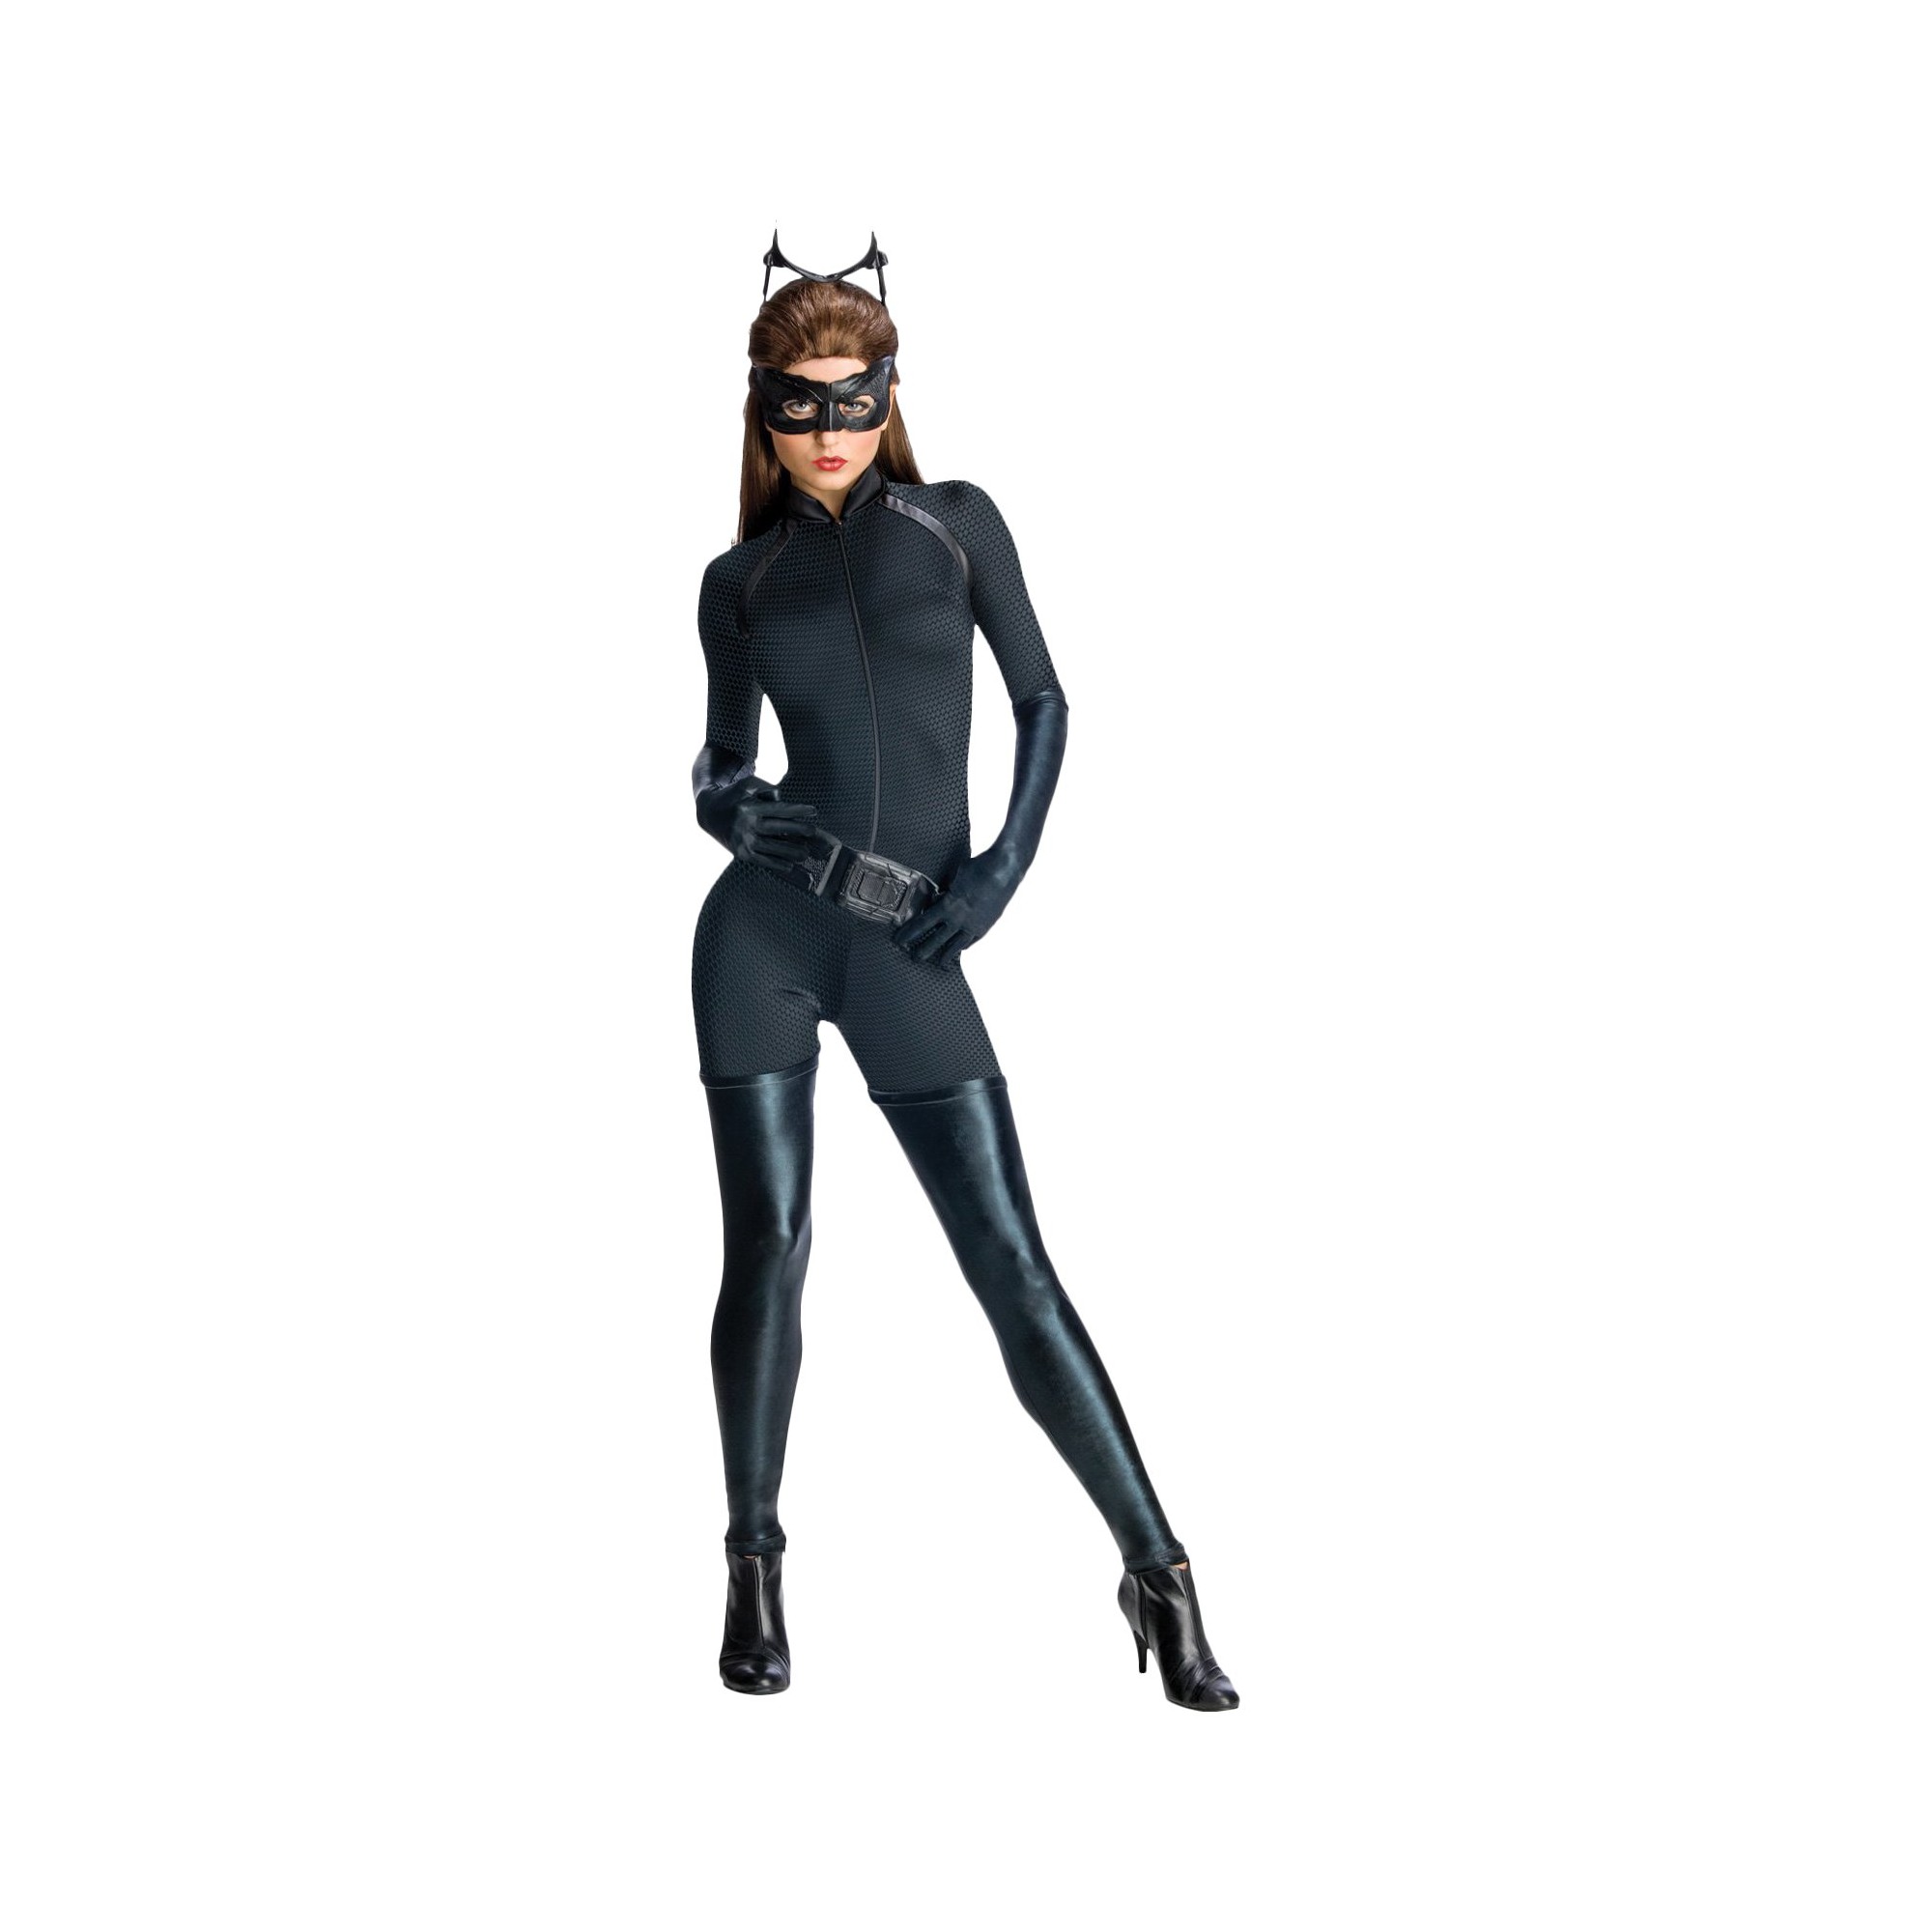 Halloween Catwoman Women's Costume The Knight Rises - Large